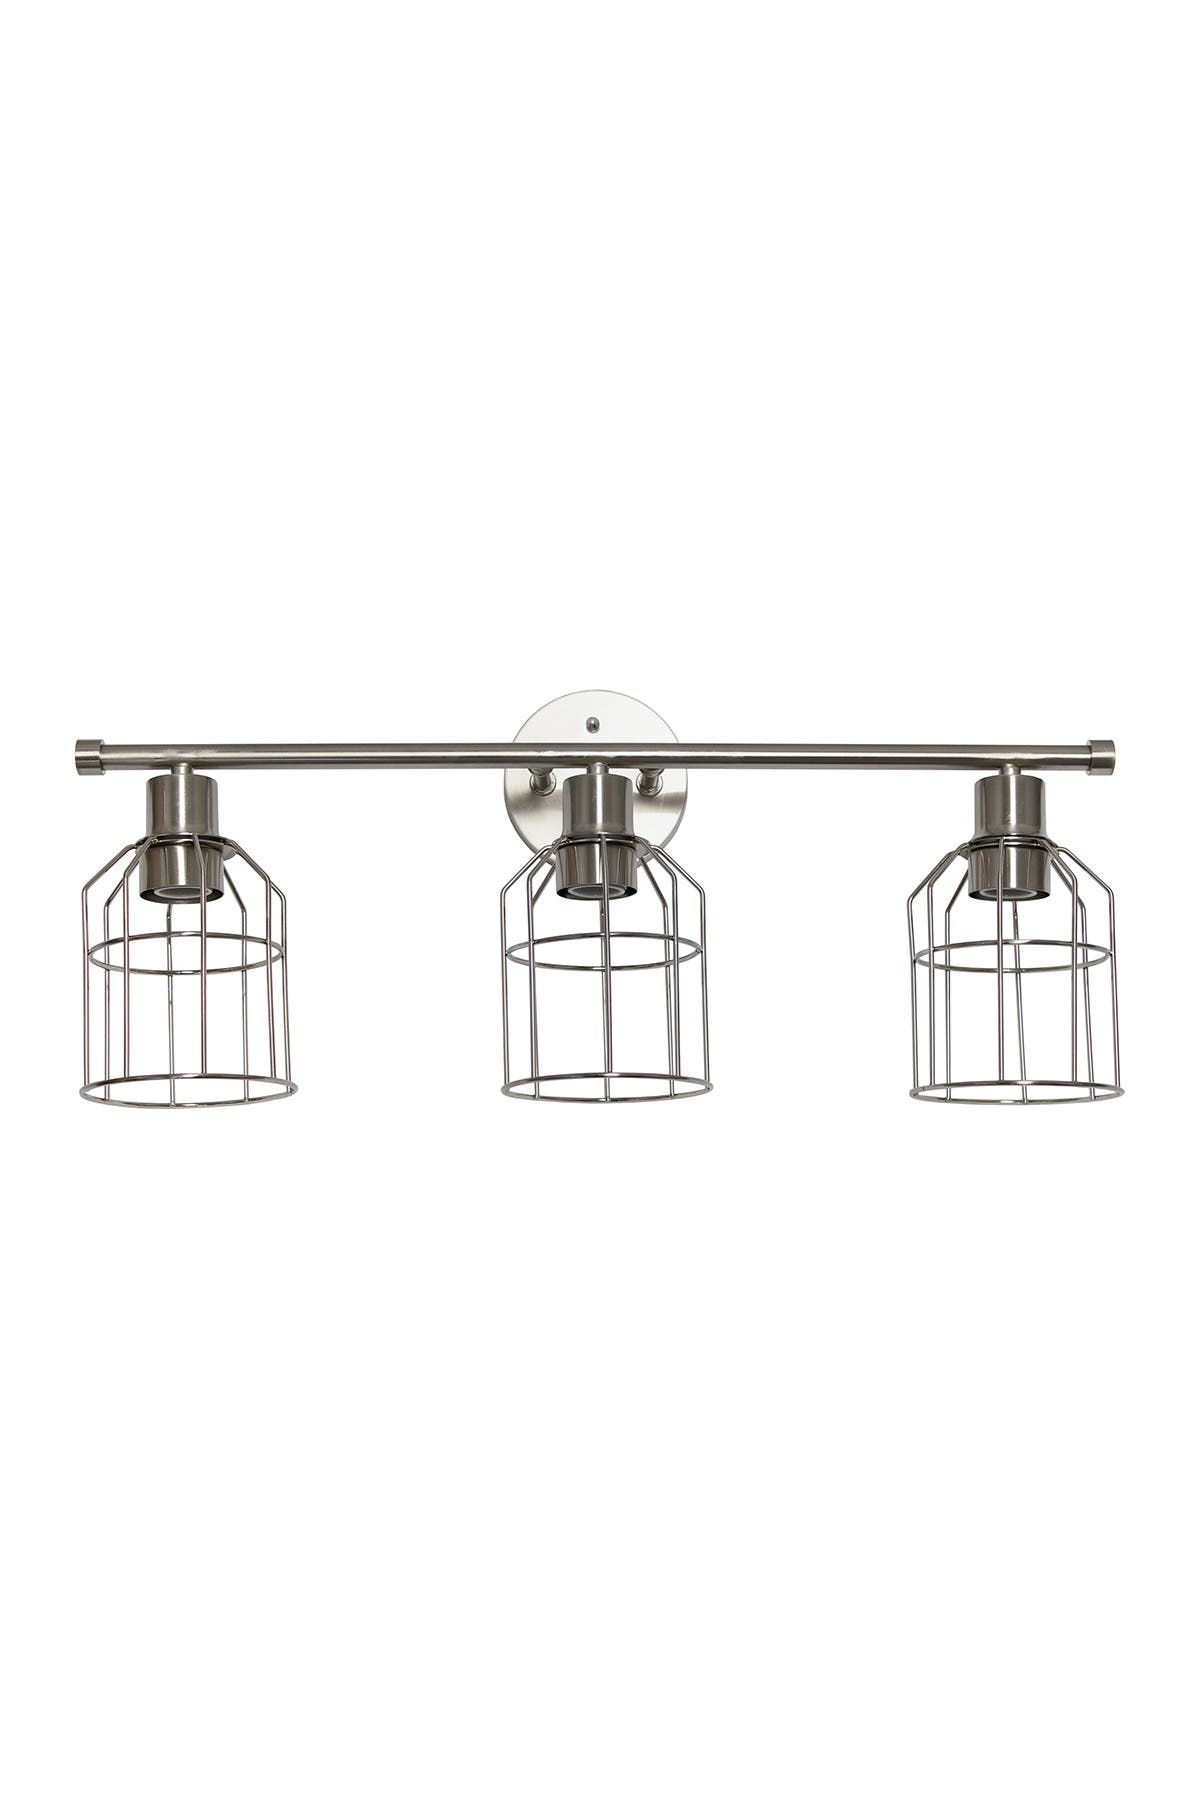 Lalia Home 3 Light Industrial Wired Vanity Light In Silver1